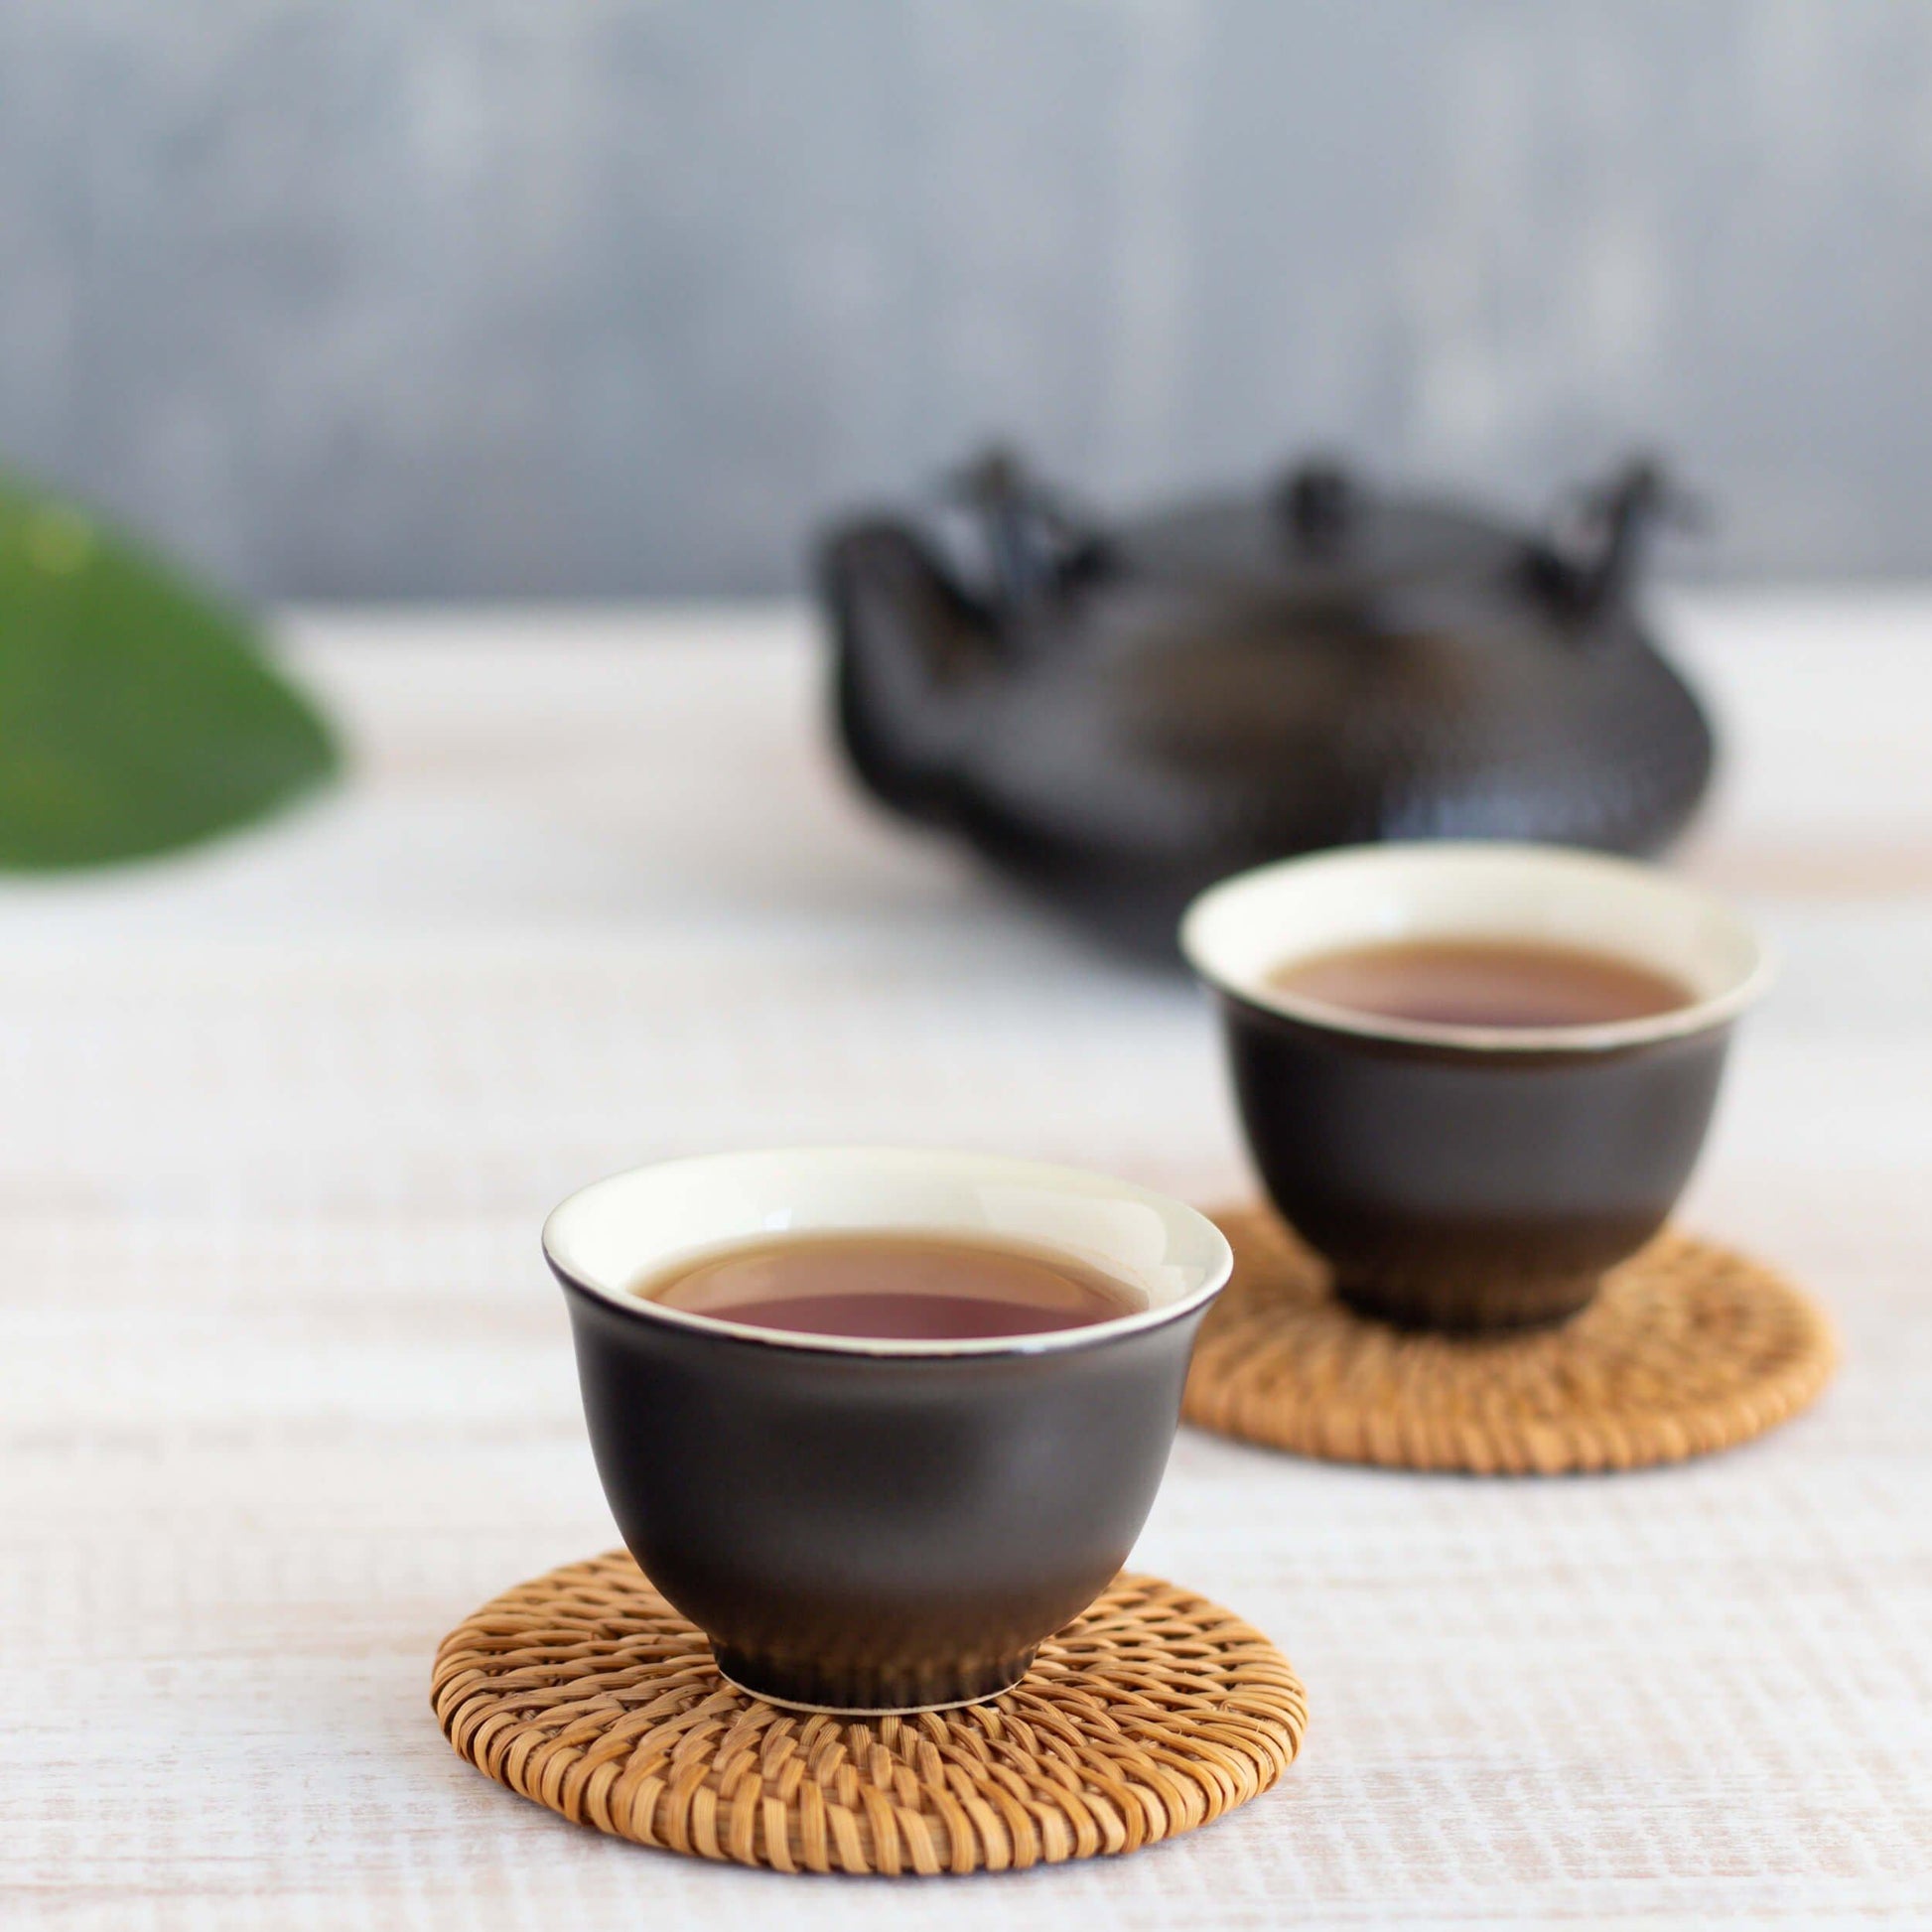 Black Currant Black Tea shown brewed in two small black teacups on rattan coasters, with a black teapot in the background